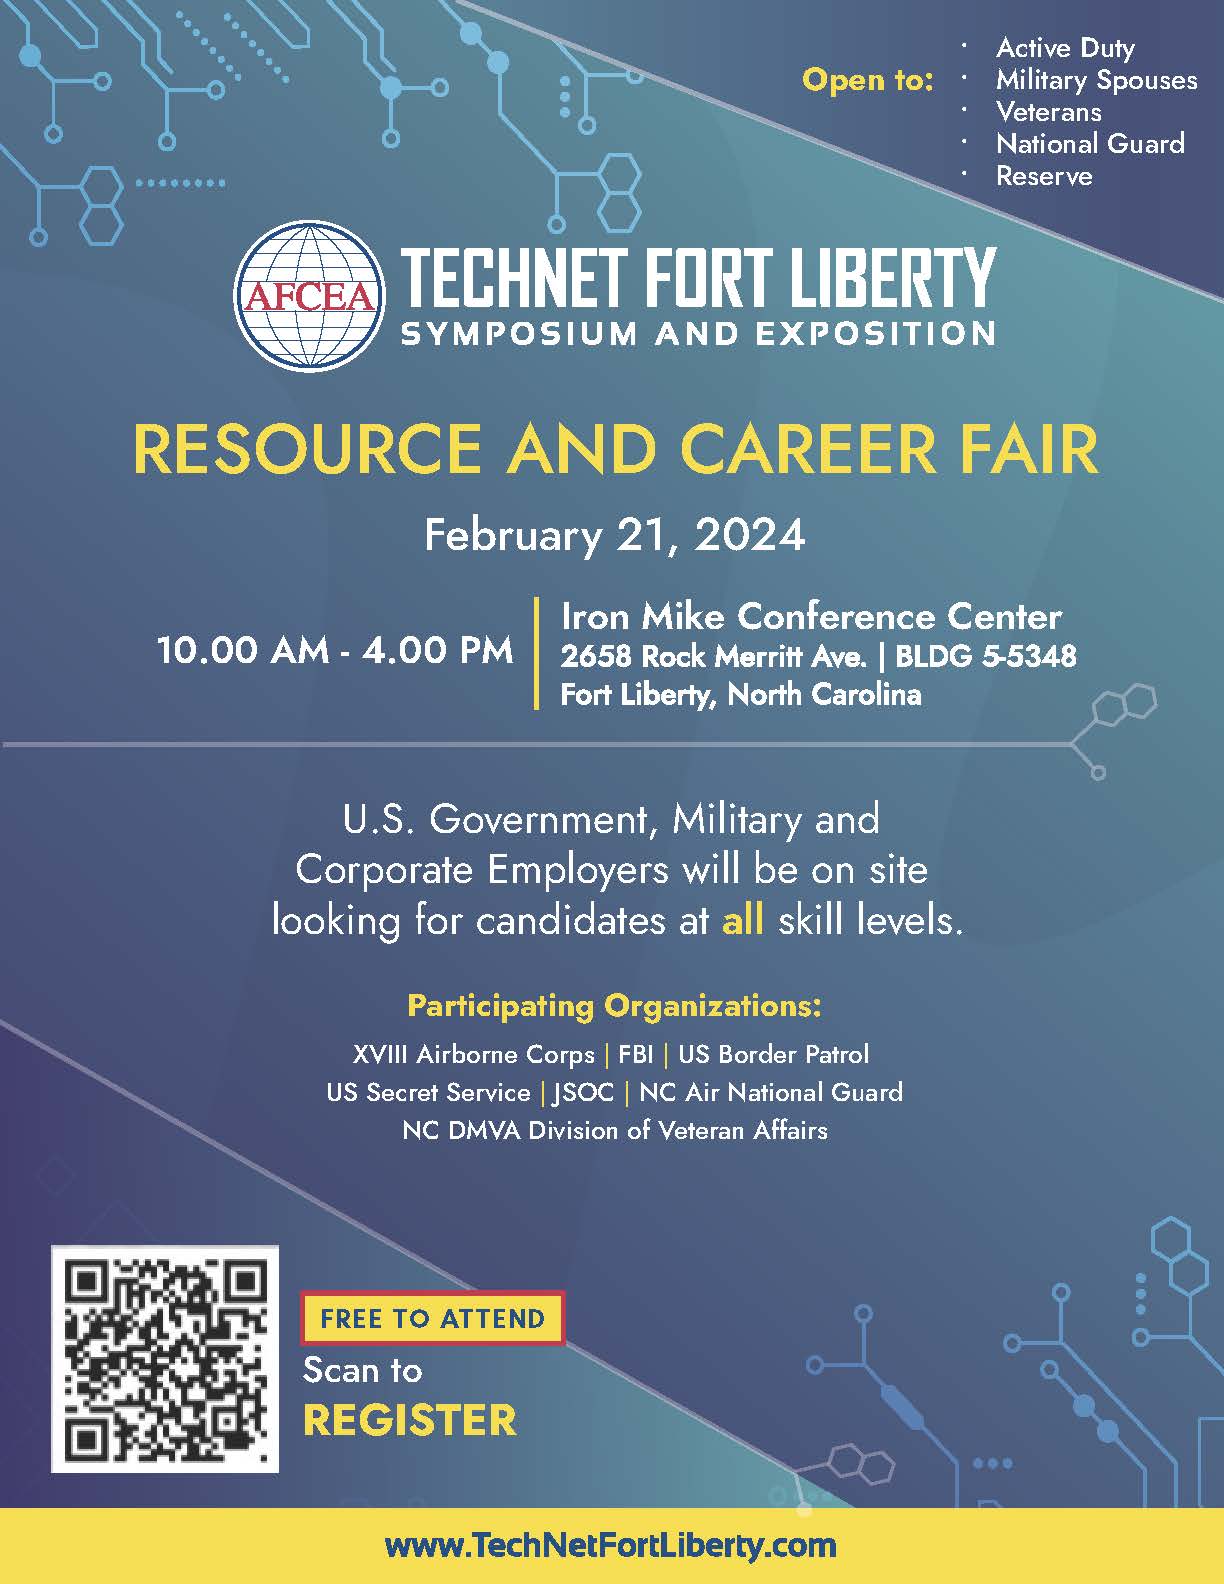 Resource & Career Fair Flyer featuring USG participating orgs